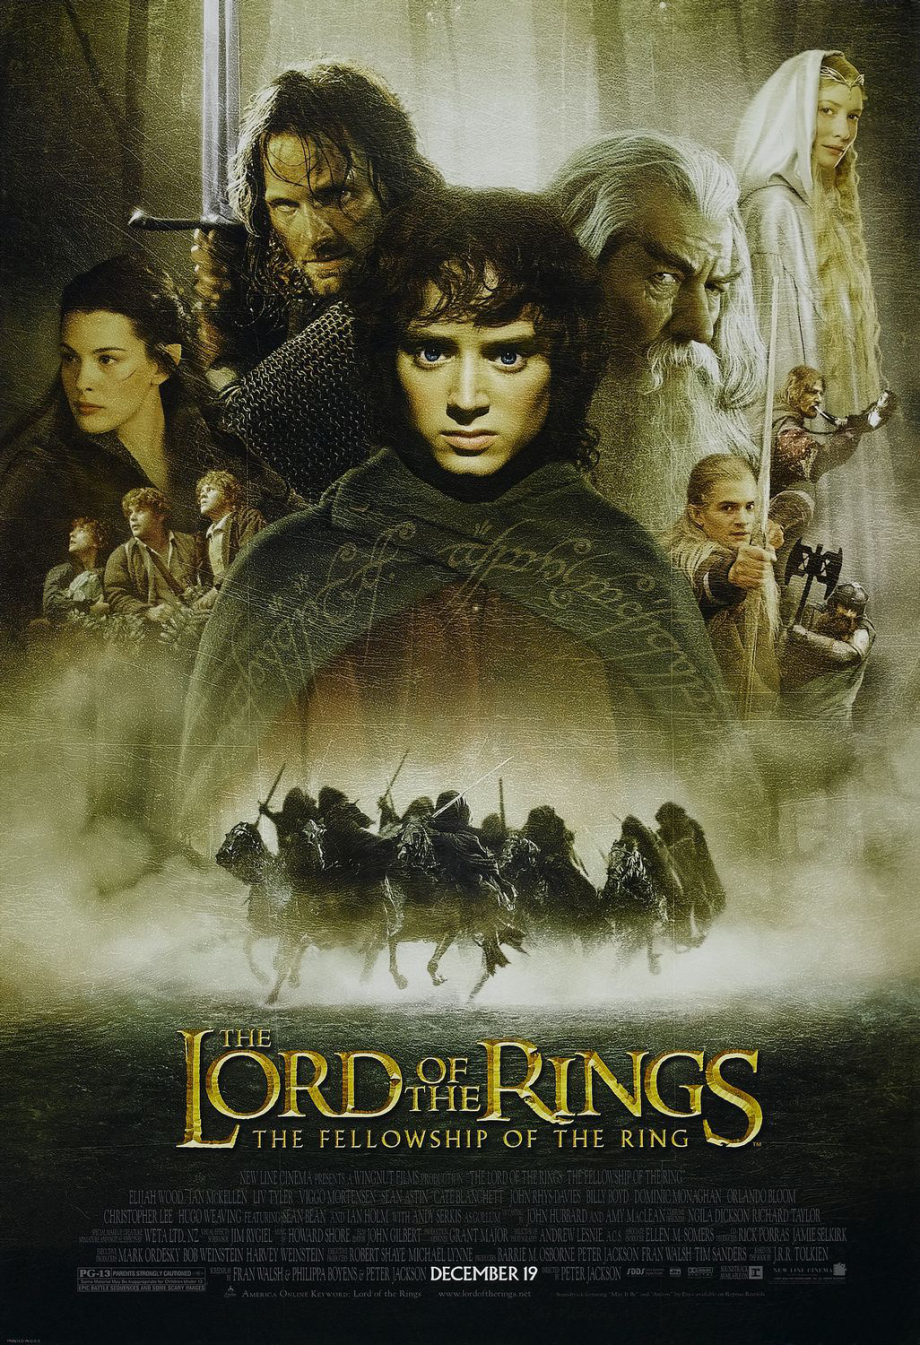 2002: The Lord of the Rings: The Two Towers — 8.7